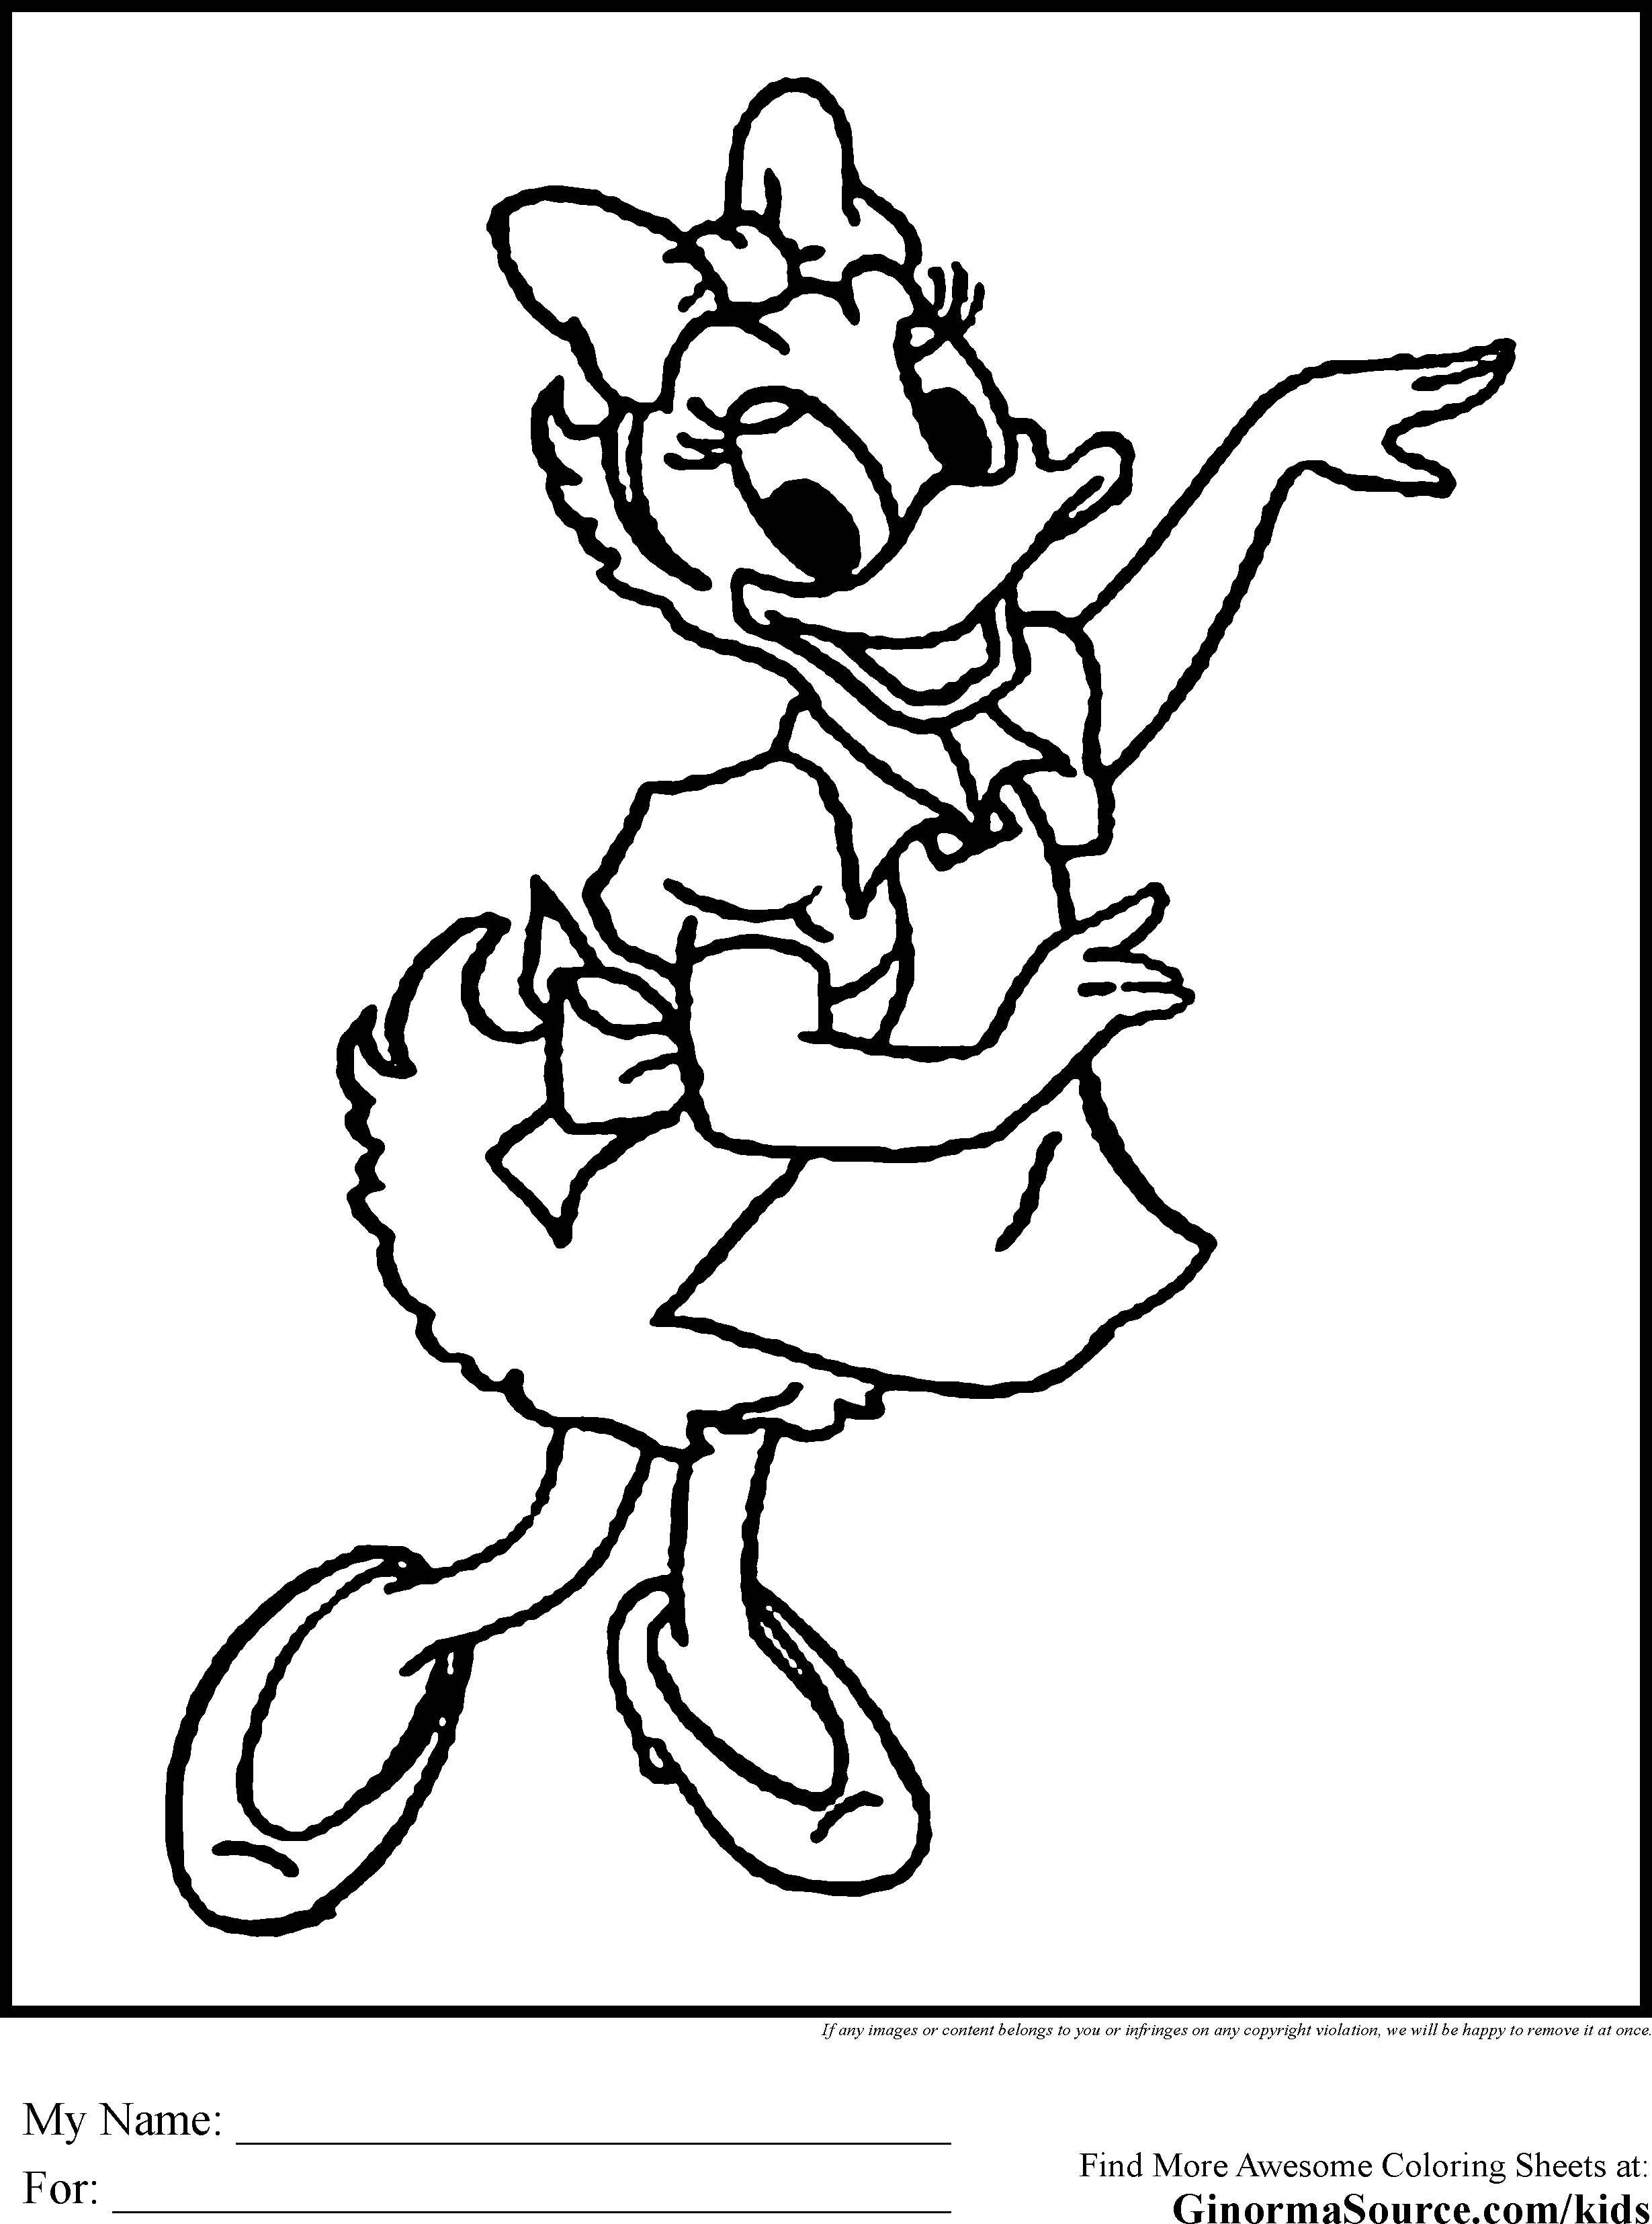 daisy-duck-free-printables-templates-printable-download